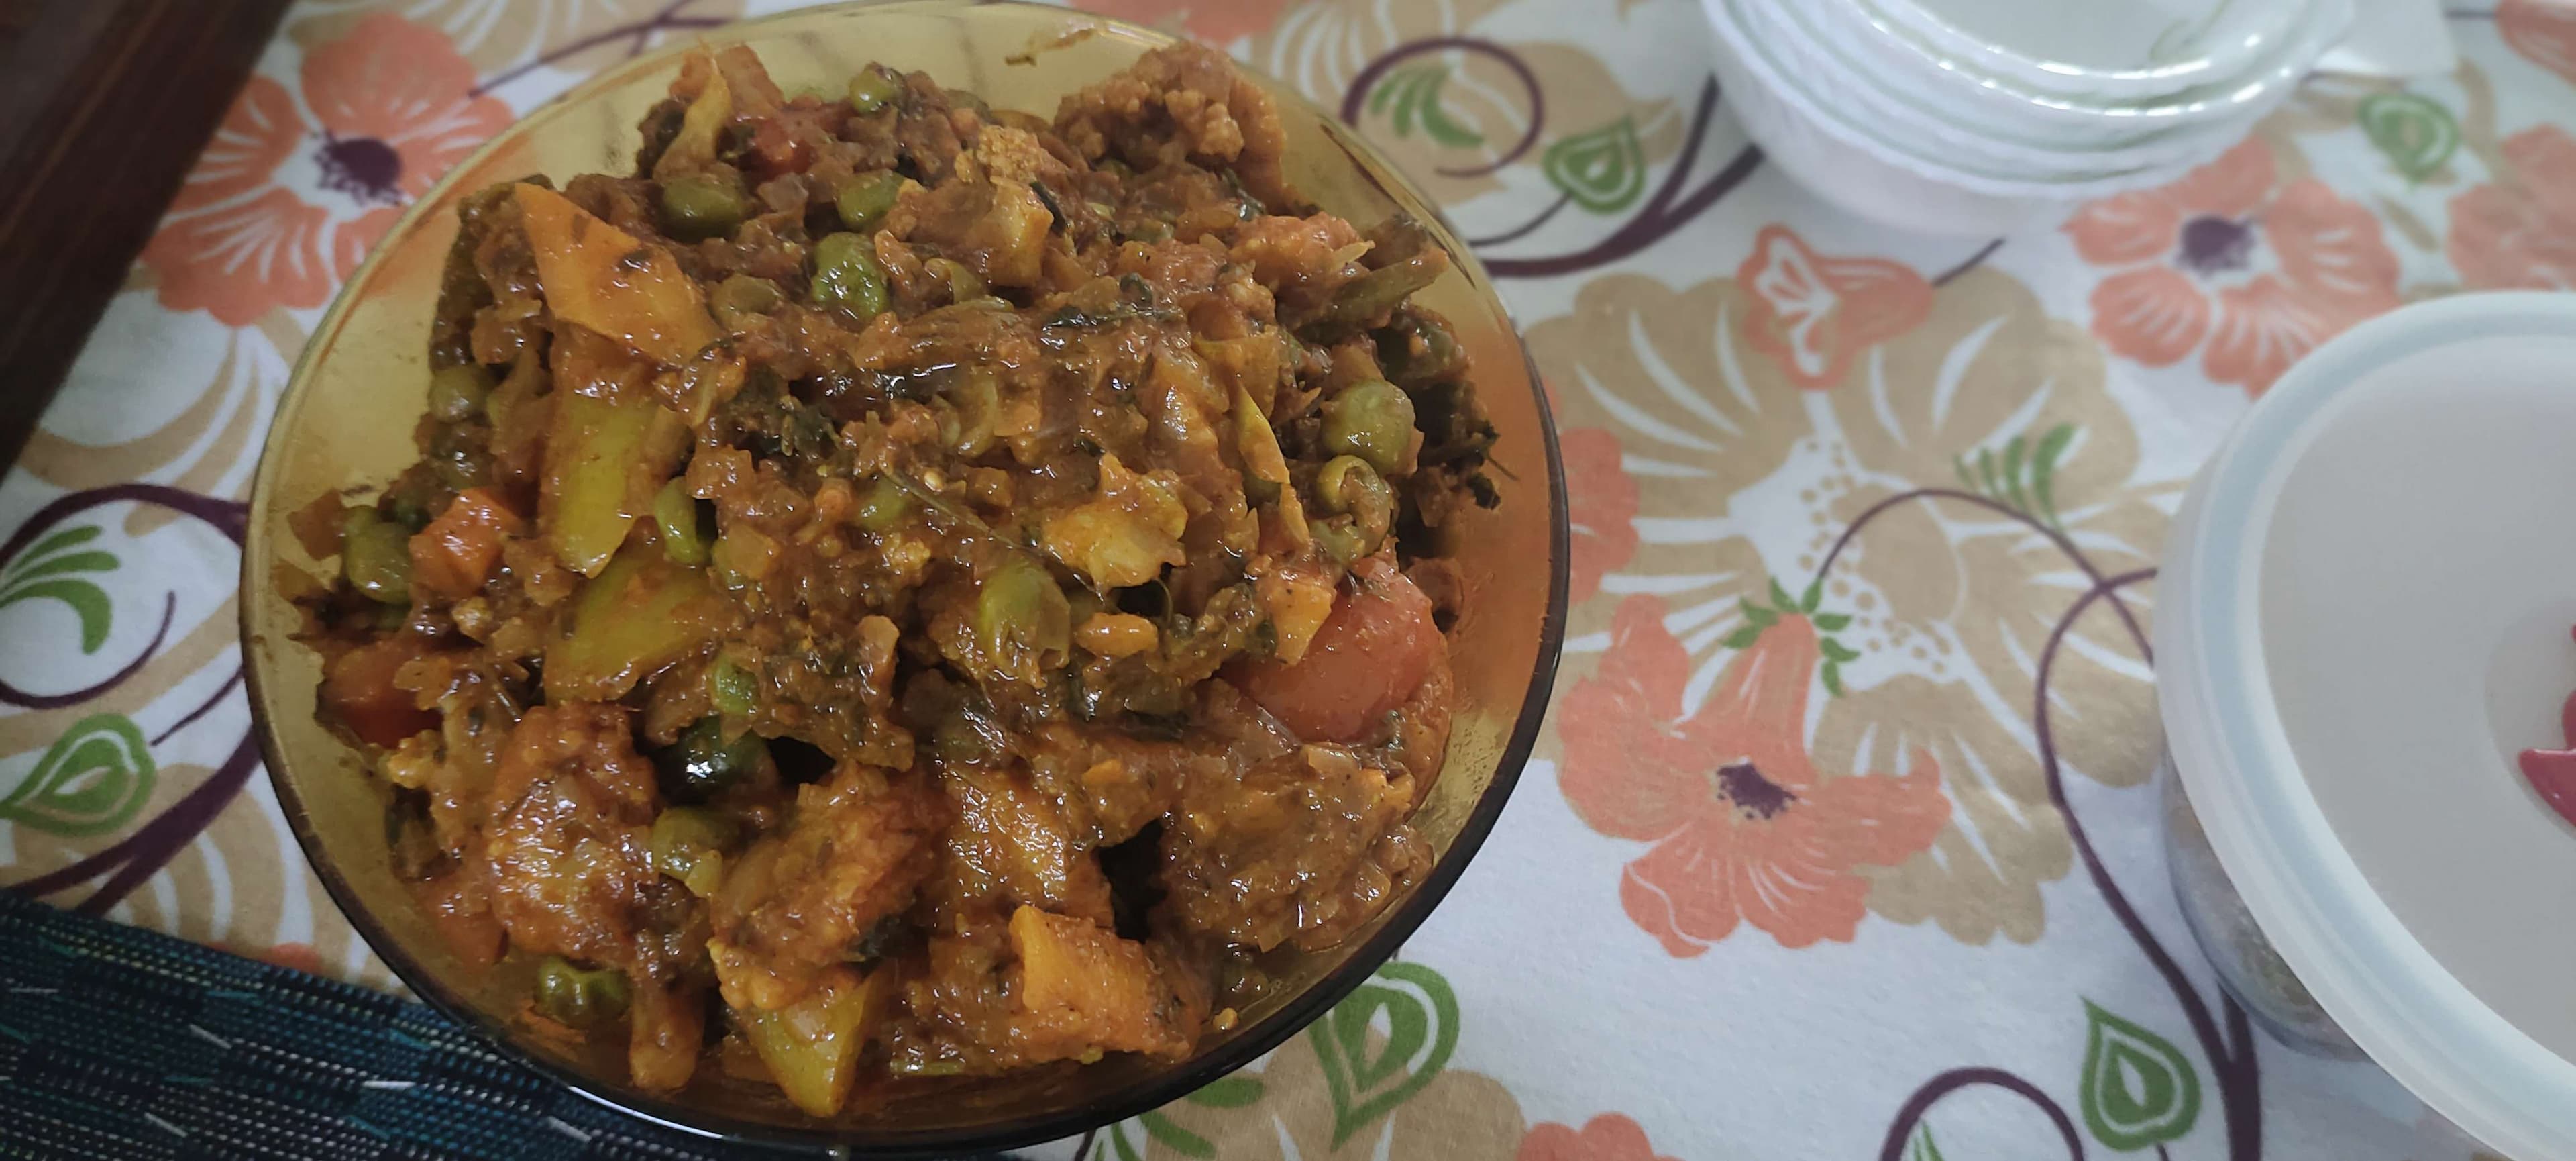 Tasty Veg Jalfrezi cooked by COOX chefs cooks during occasions parties events at home